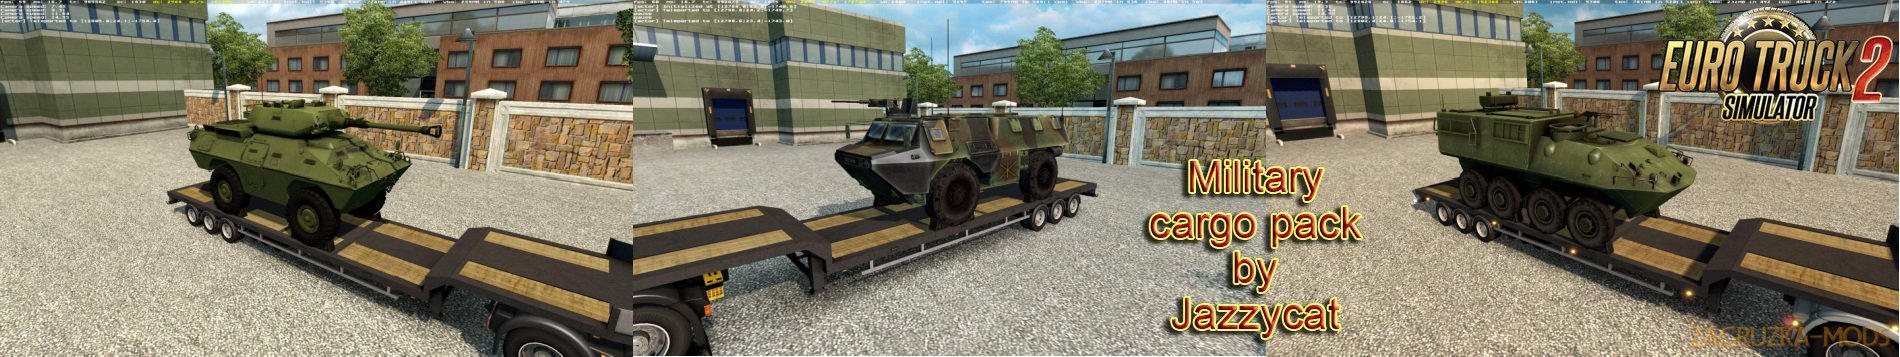 Military Cargo Pack v2.3 by Jazzycat